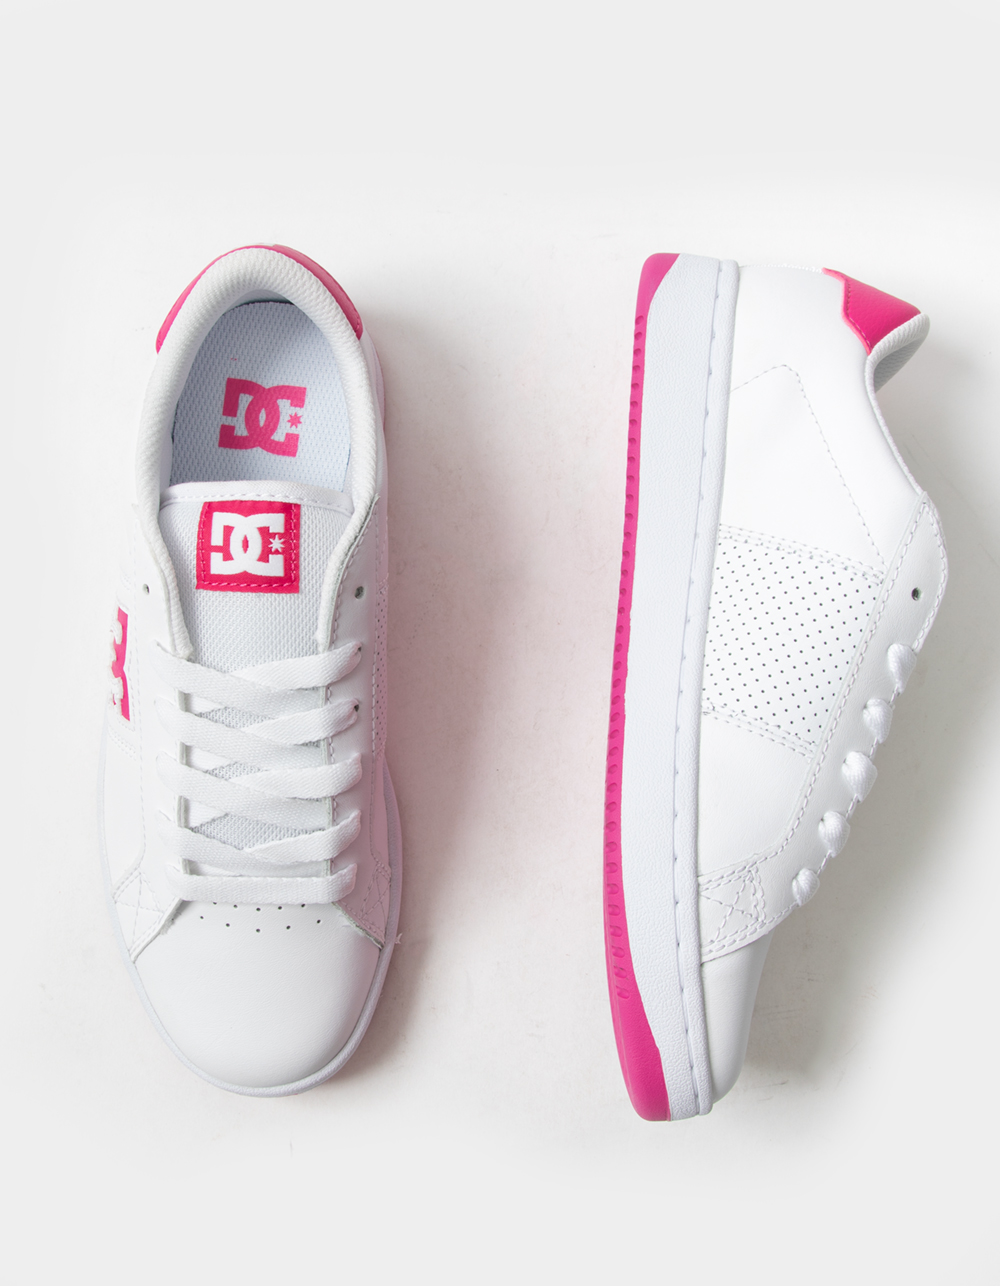 DC SHOES Striker Womens Shoes - WHITE | Tillys